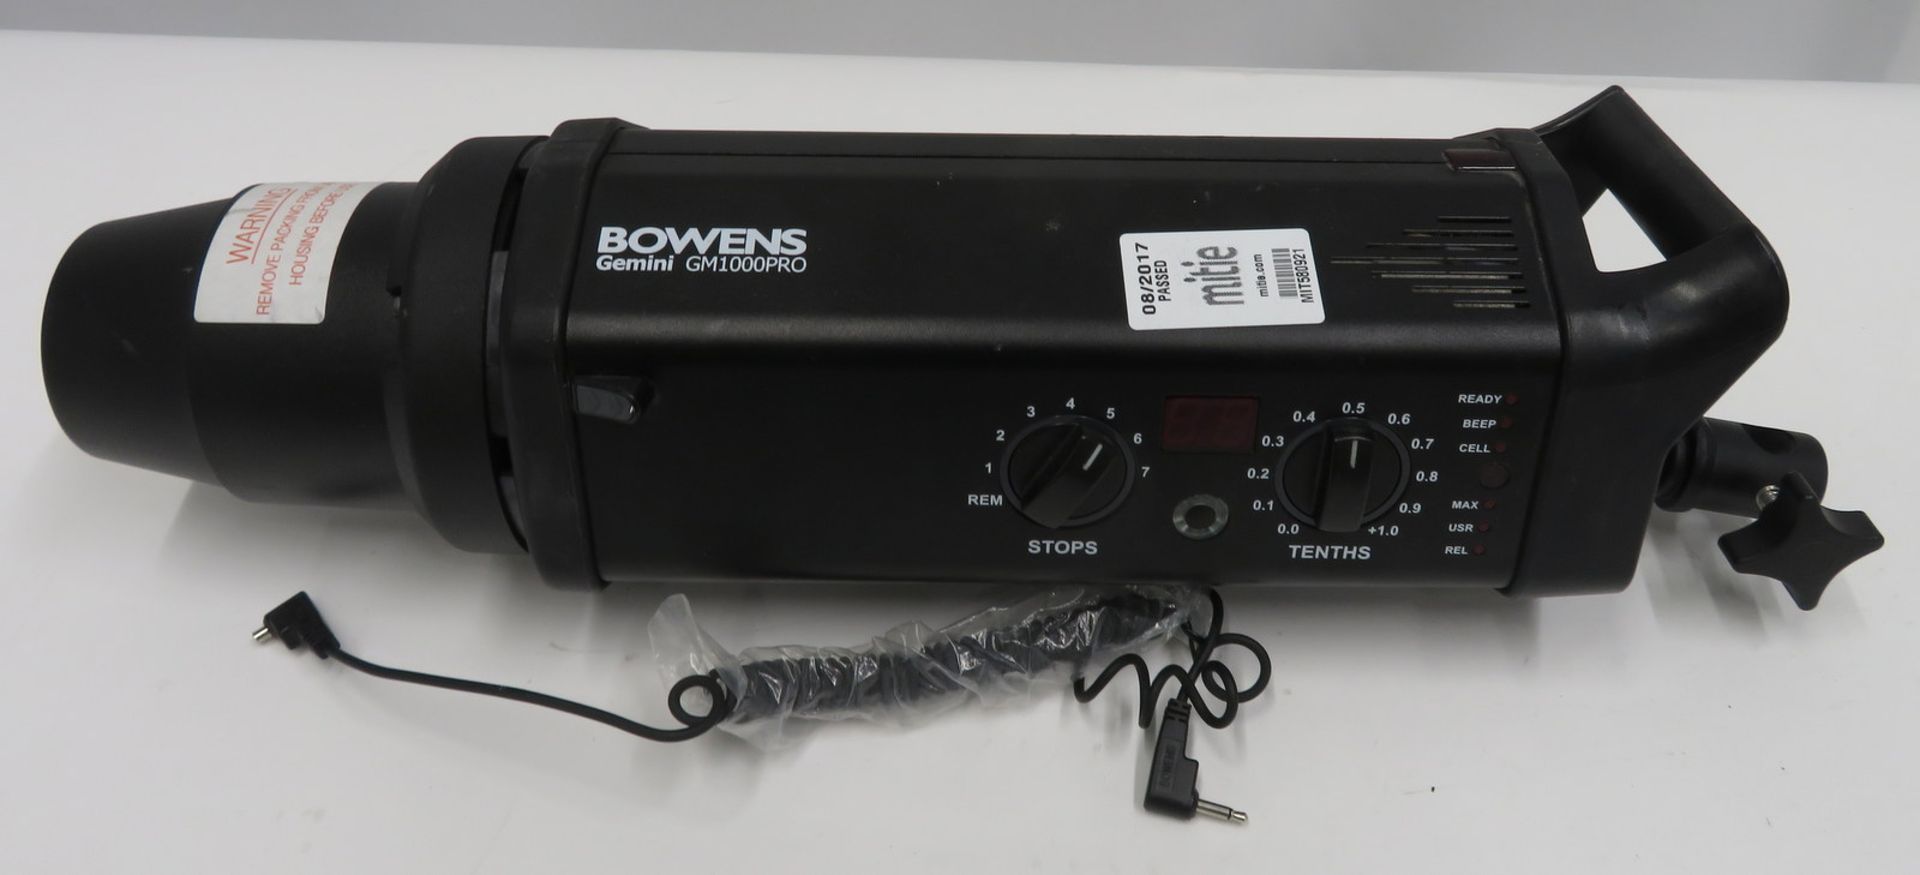 Bowens Gemini GM1000PRO studio light with cables